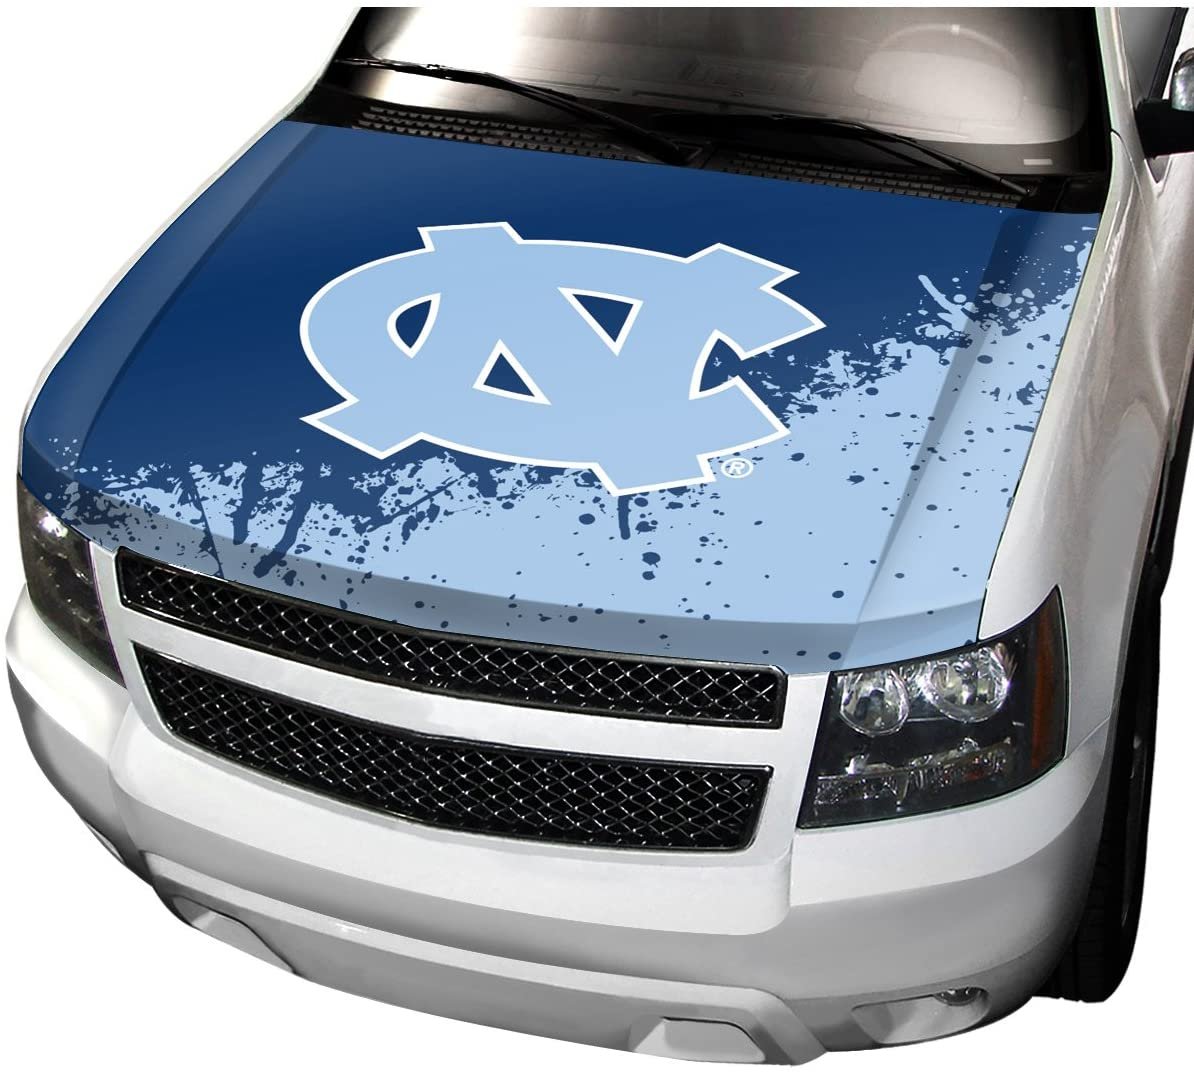 University of North Carolina Tar Heels Auto Hood Cover, One Size, One Color